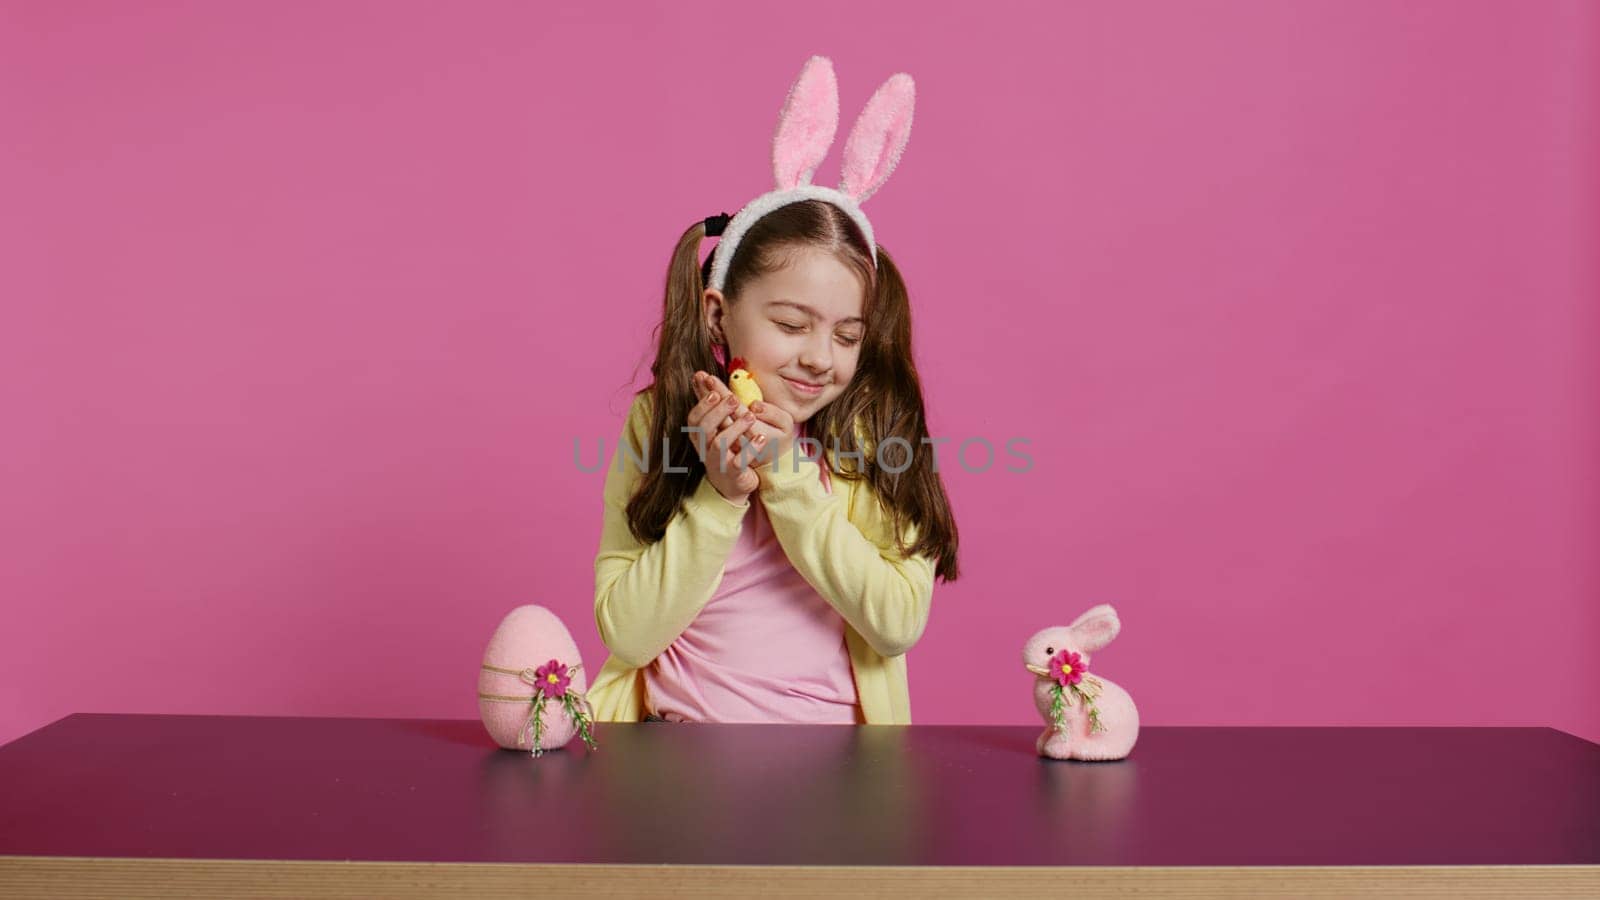 Joyful little girl playing with festive easter decorations in studio, creating arrangements with a chick, rabbit and egg. Smiling cute toddler with bunny ears showing colorful ornaments. Camera B.